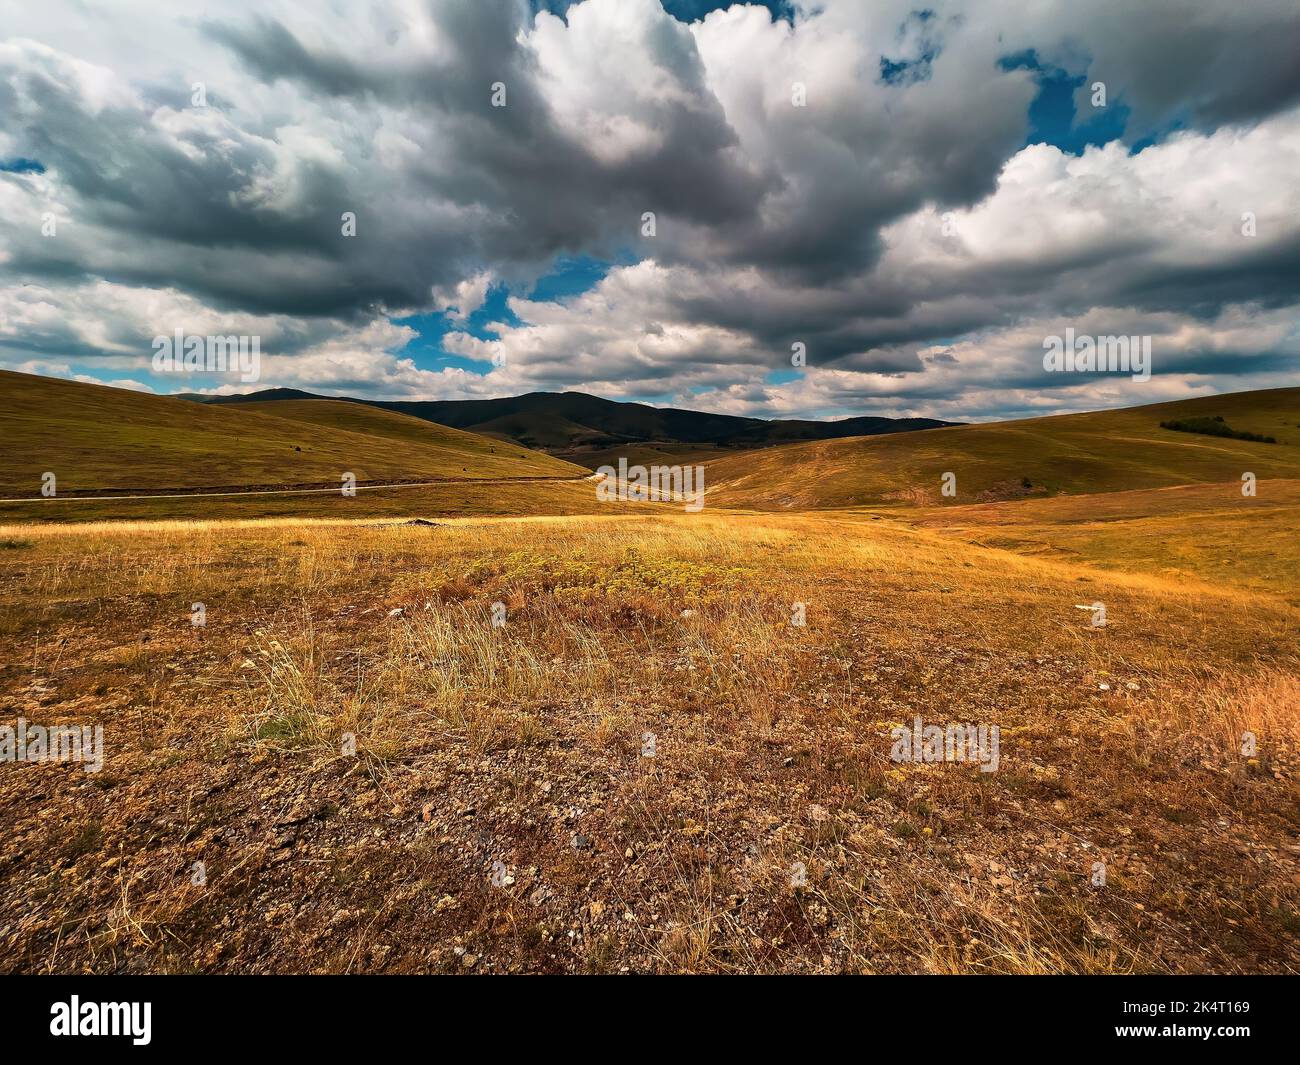 Zlatibor mountain hill landscape with beautiful clouds in background and dry grass in foreground Stock Photo